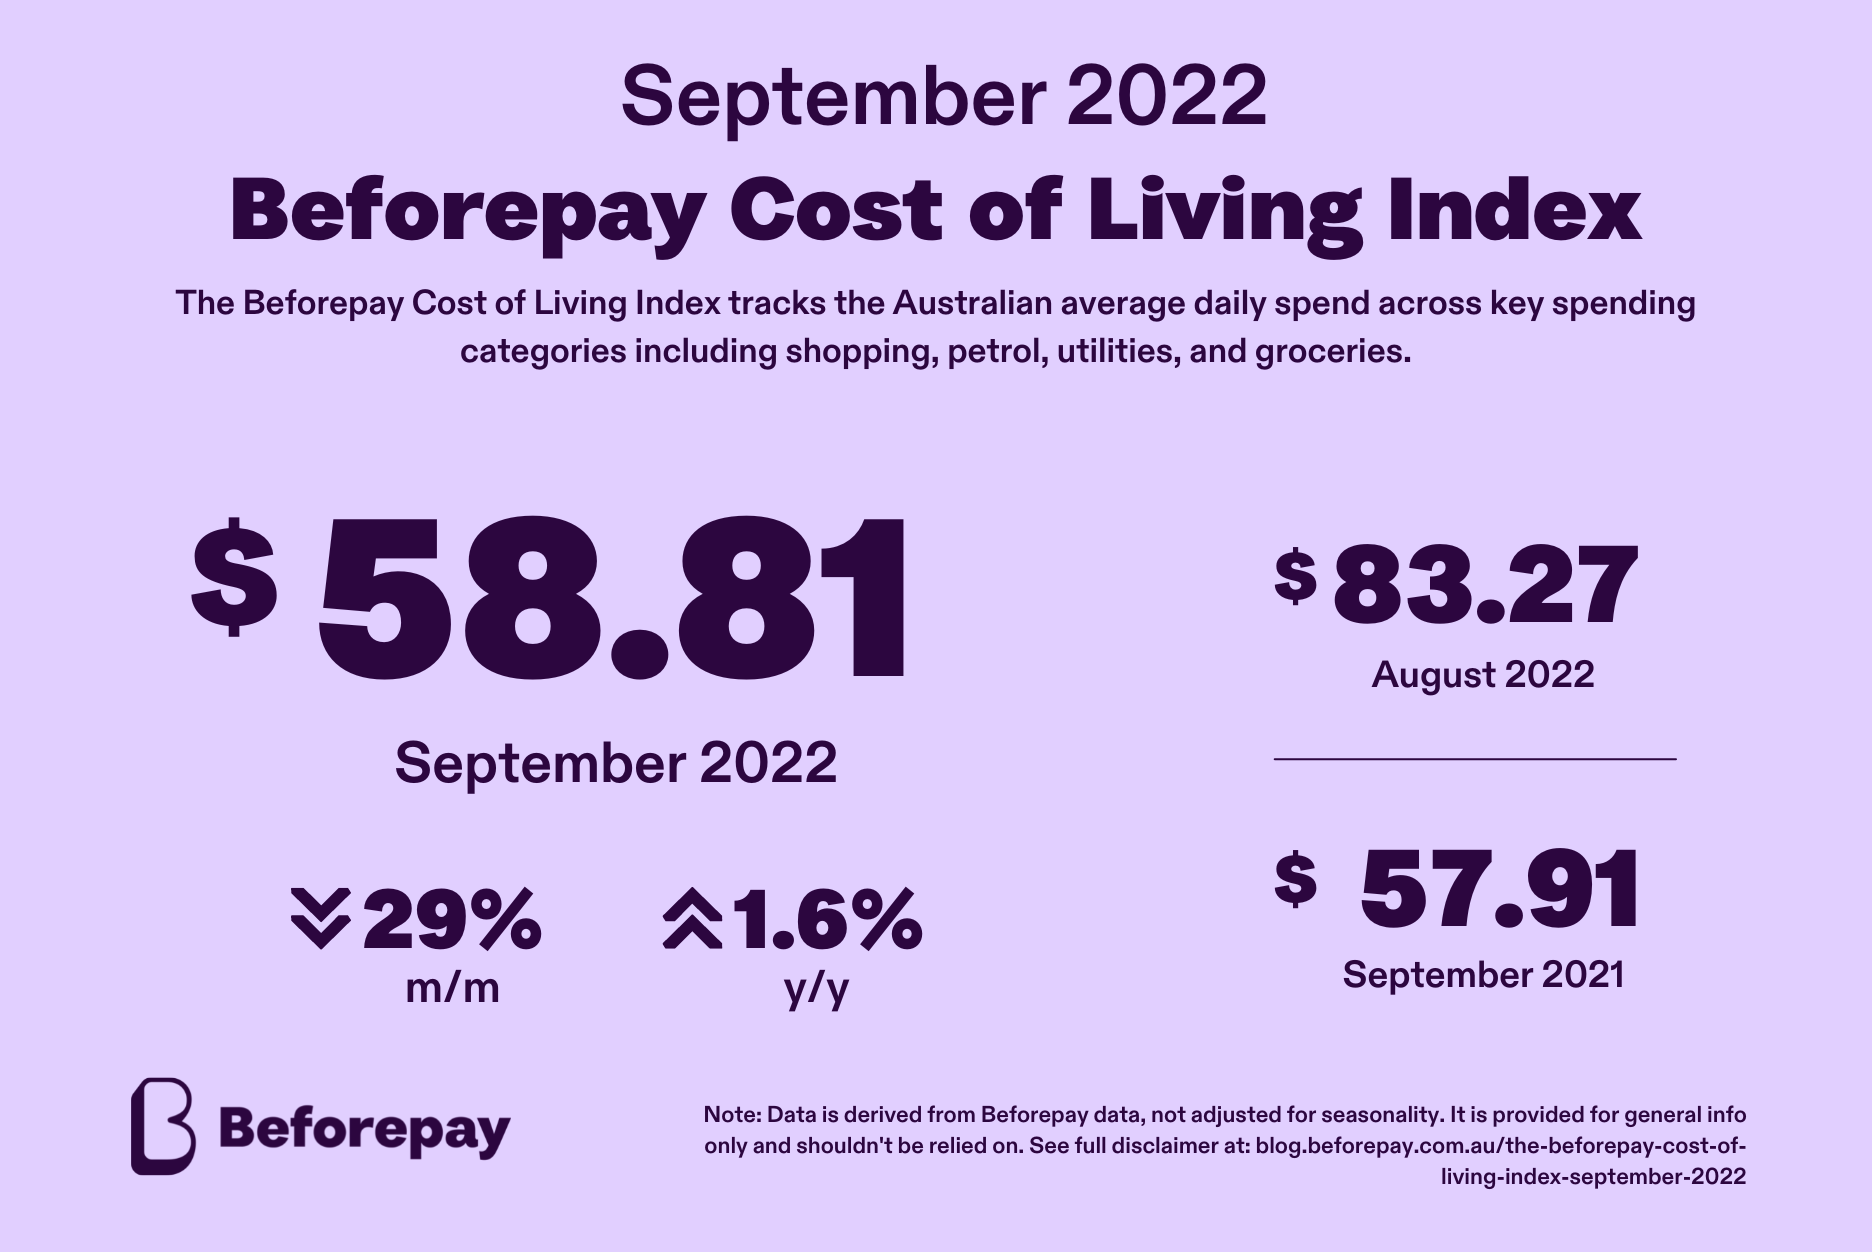 Daily spending for the average Australian dropped 29% in September 2022 to $58.81, from $83.27 in August, according to the Beforepay Cost of Living Index.